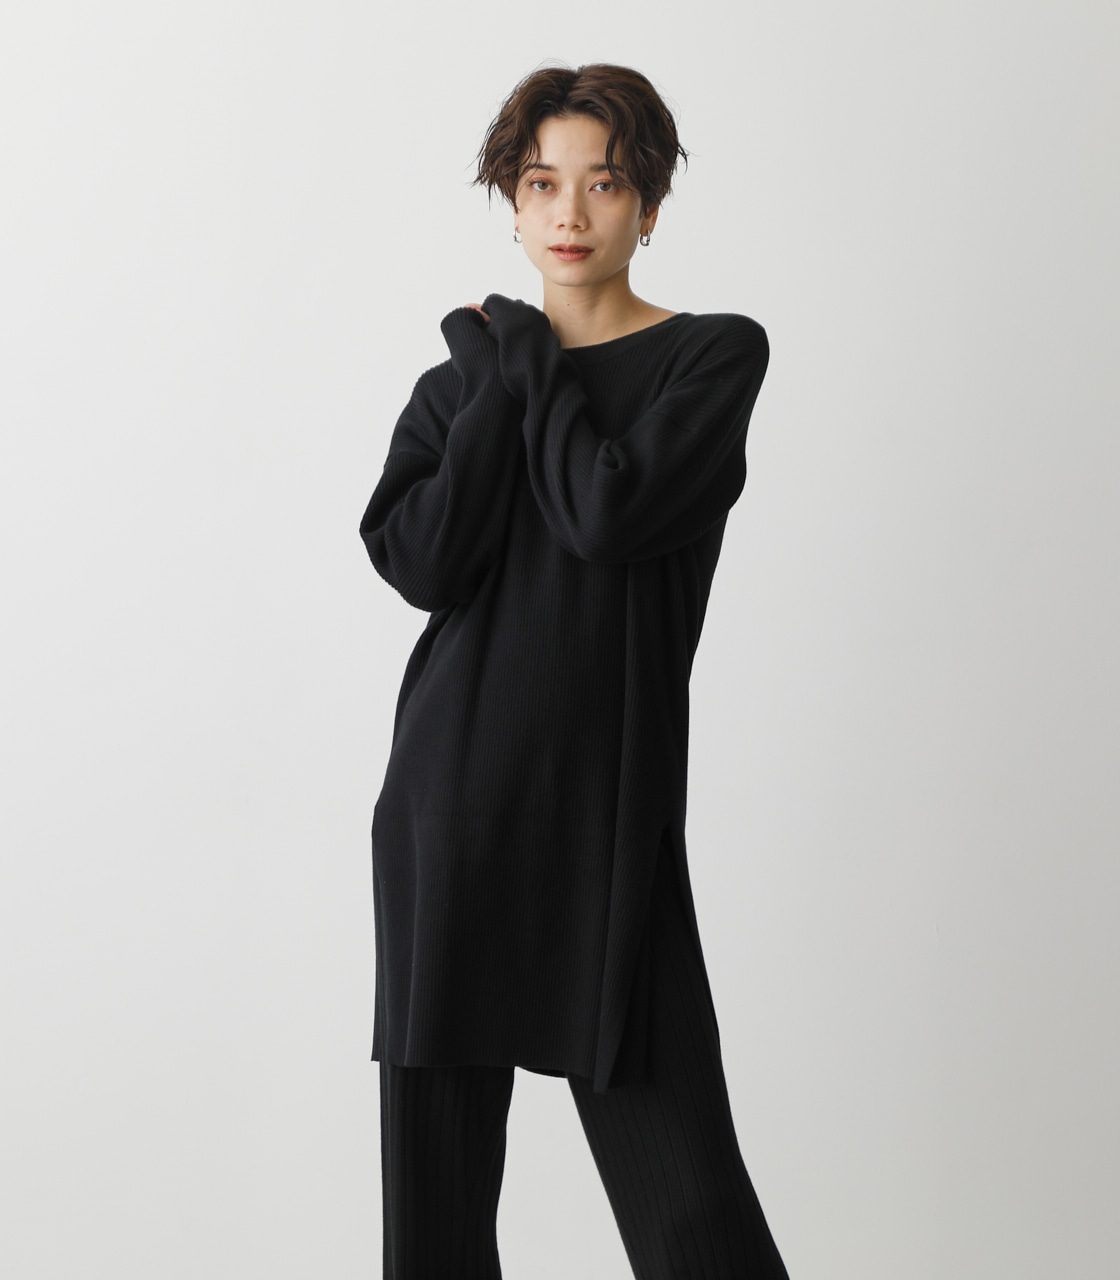 2WAY RIB KNIT LONG TOPS/2WAYリブニットロングトップス 詳細画像 BLK 1